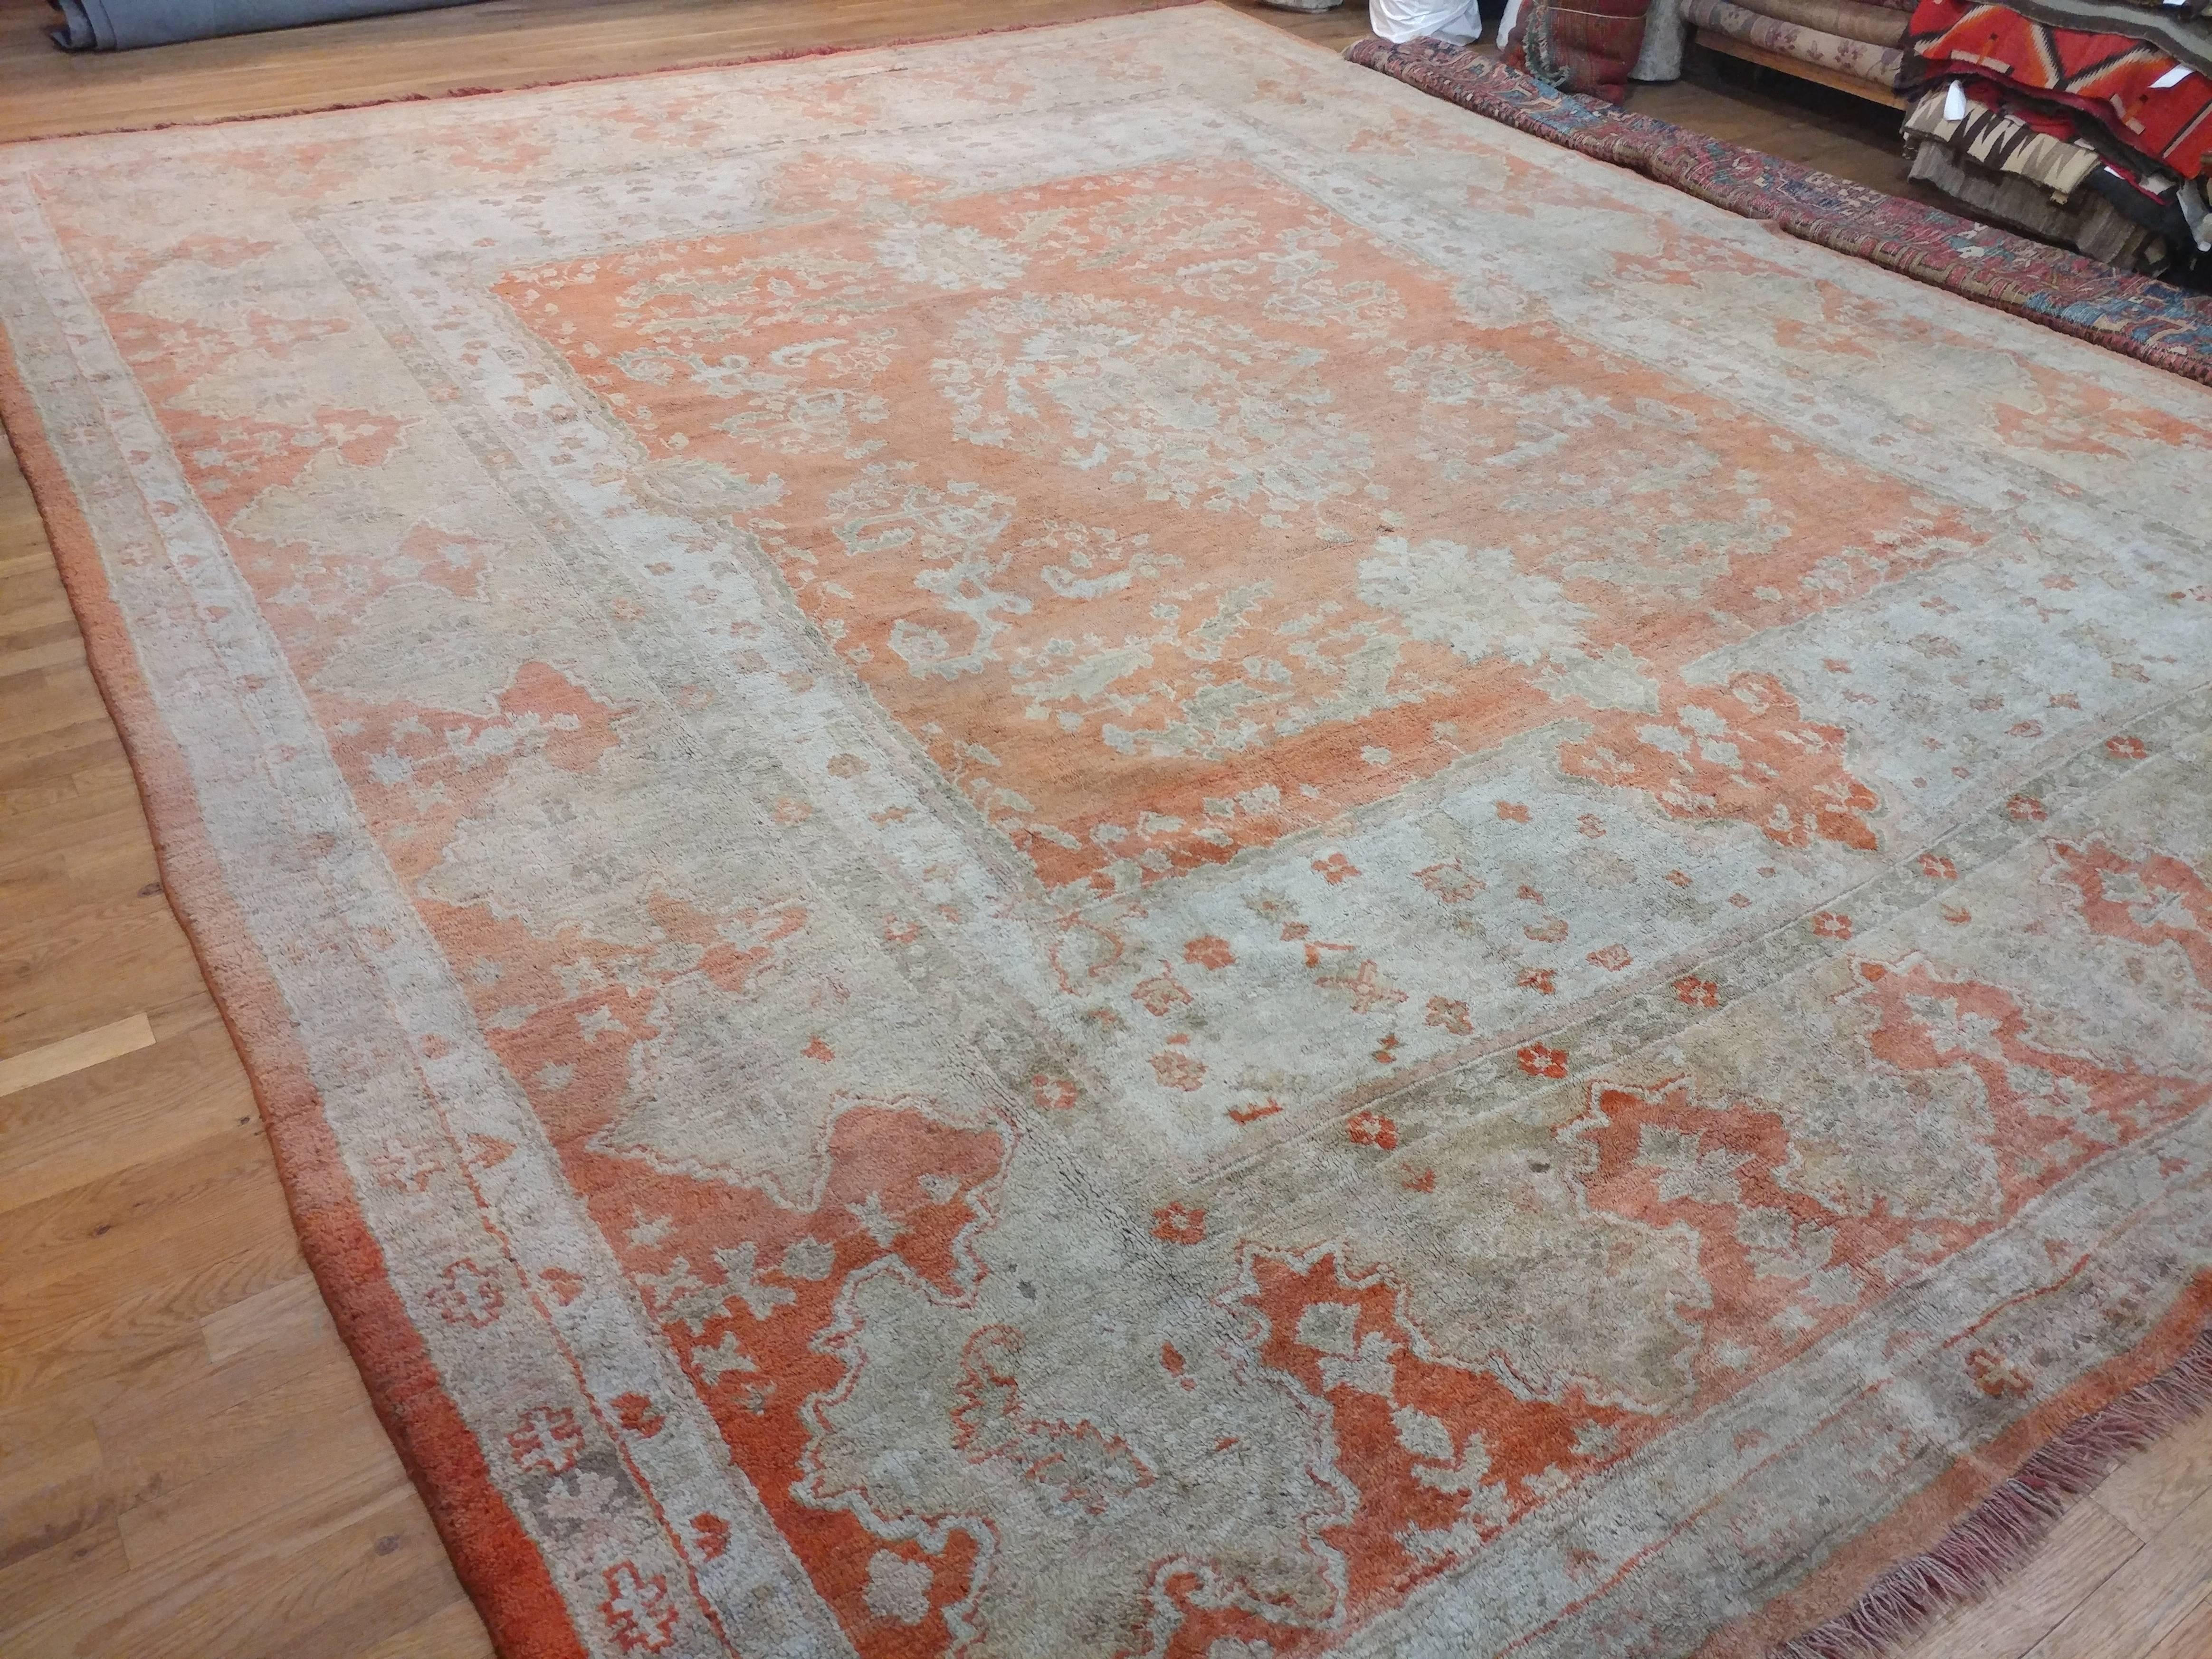 Antique Oushak Carpet, Turkish Rugs, Handmade Oriental Rugs, Ivory Coral Taupe 2